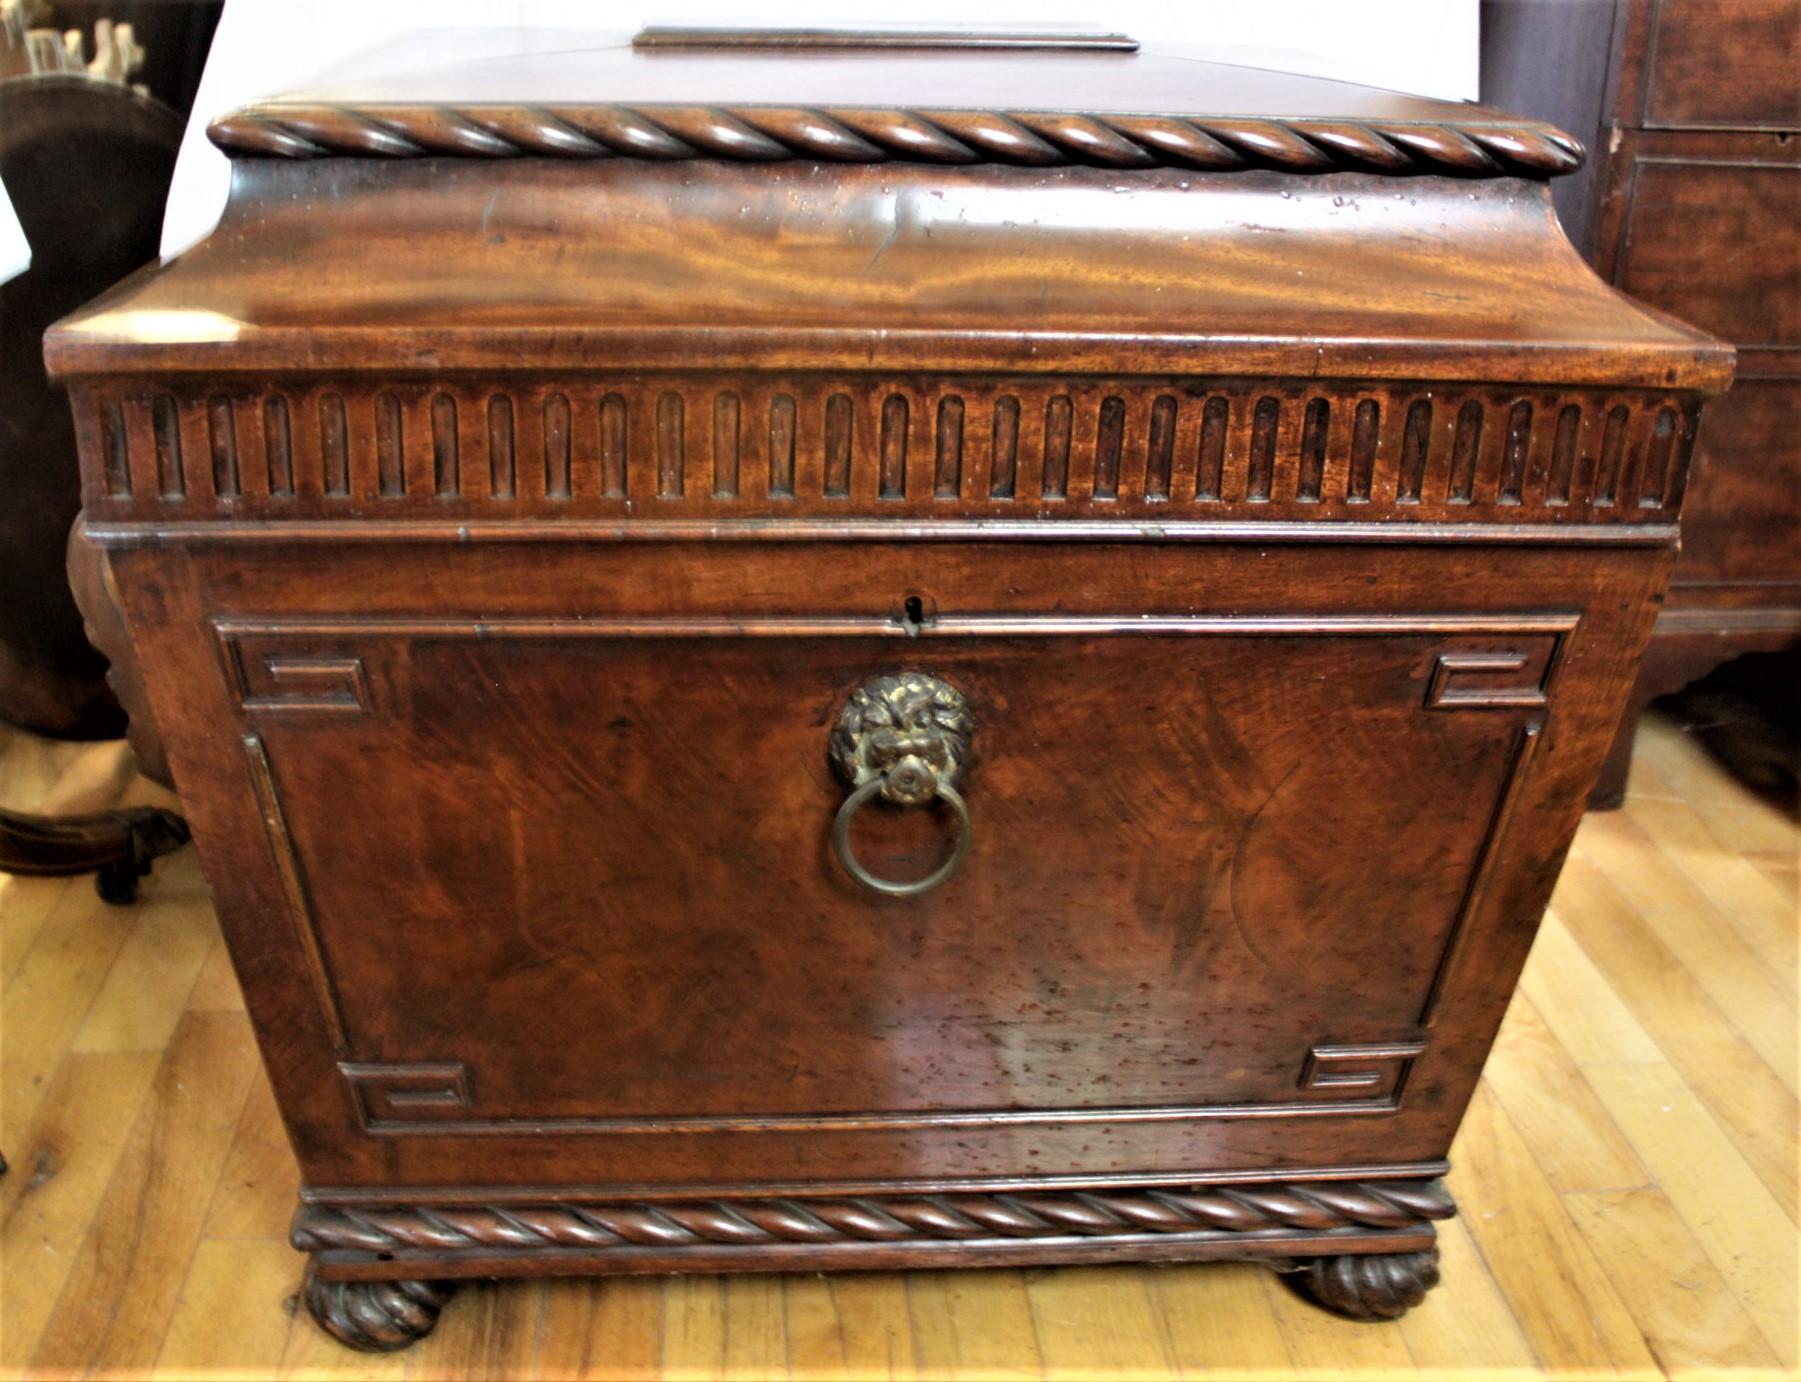 This antique English flamed mahogany wine cooler dates to circa 1830 and done in the period William IV style. The cabinet is done in flamed mahogany with rope motif border decoration on the raised top and bottom edges and used to accent the bun